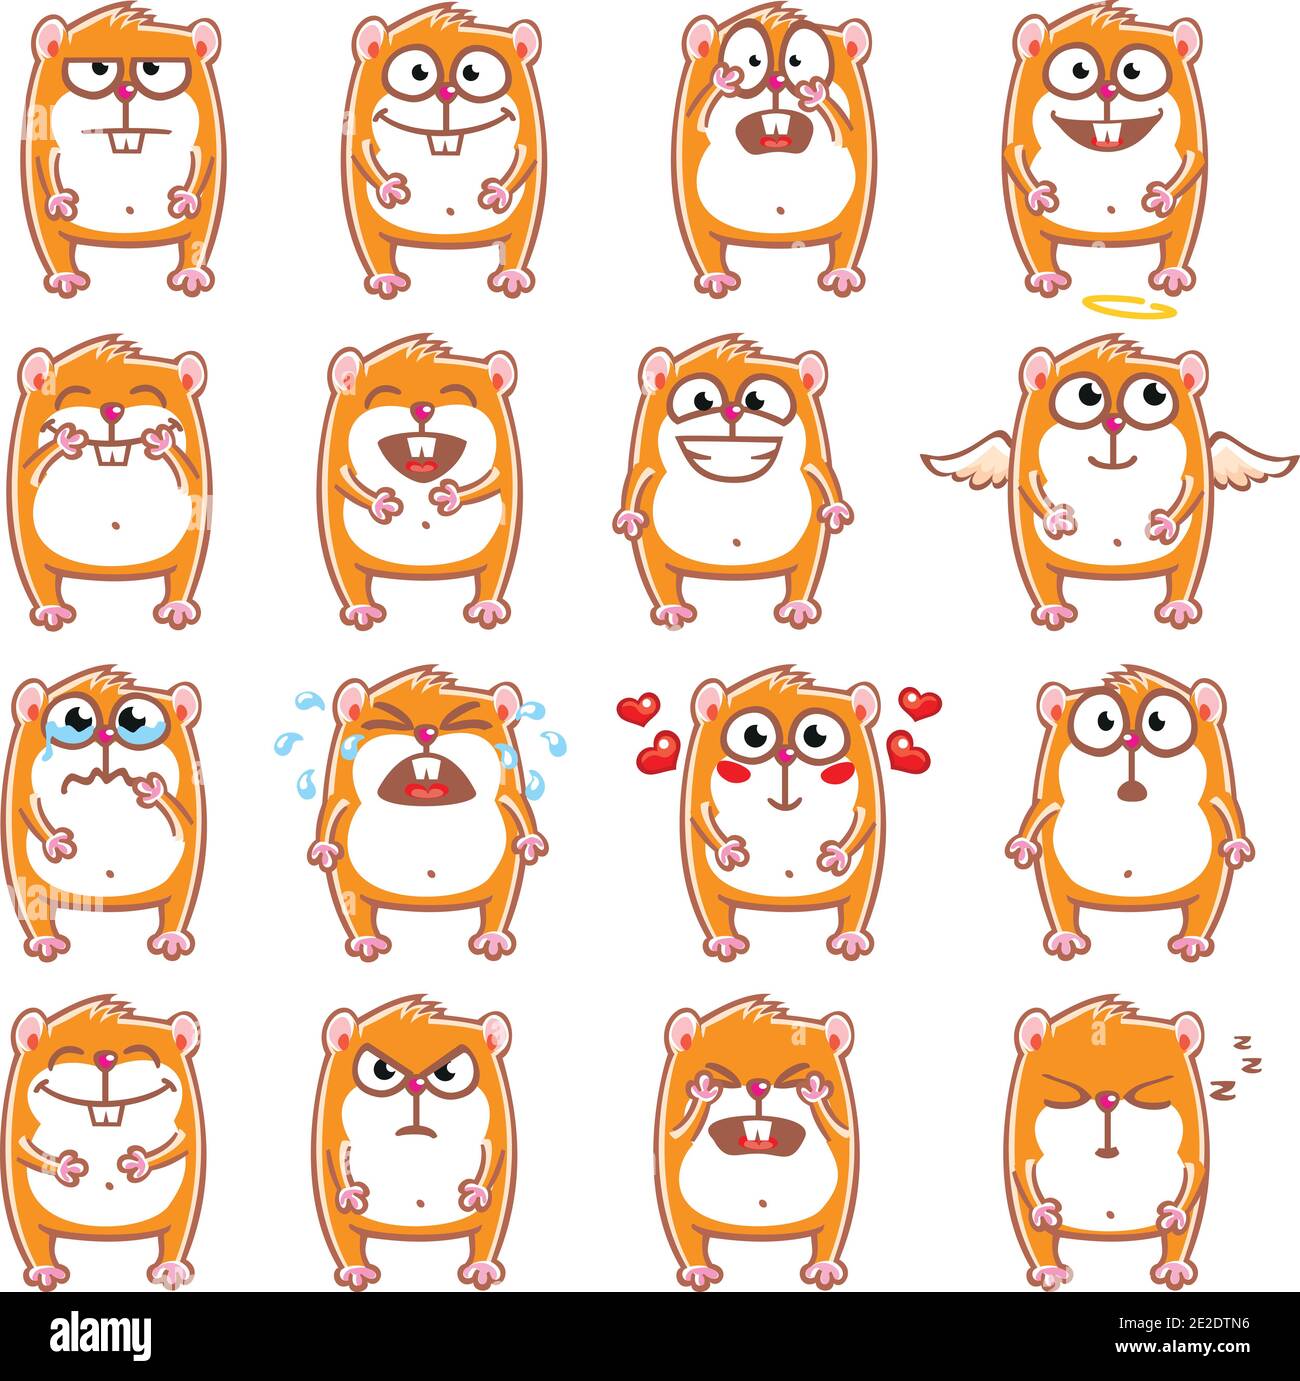 16 smiley hamsters individually grouped for easy copy-n-paste. Stock Vector